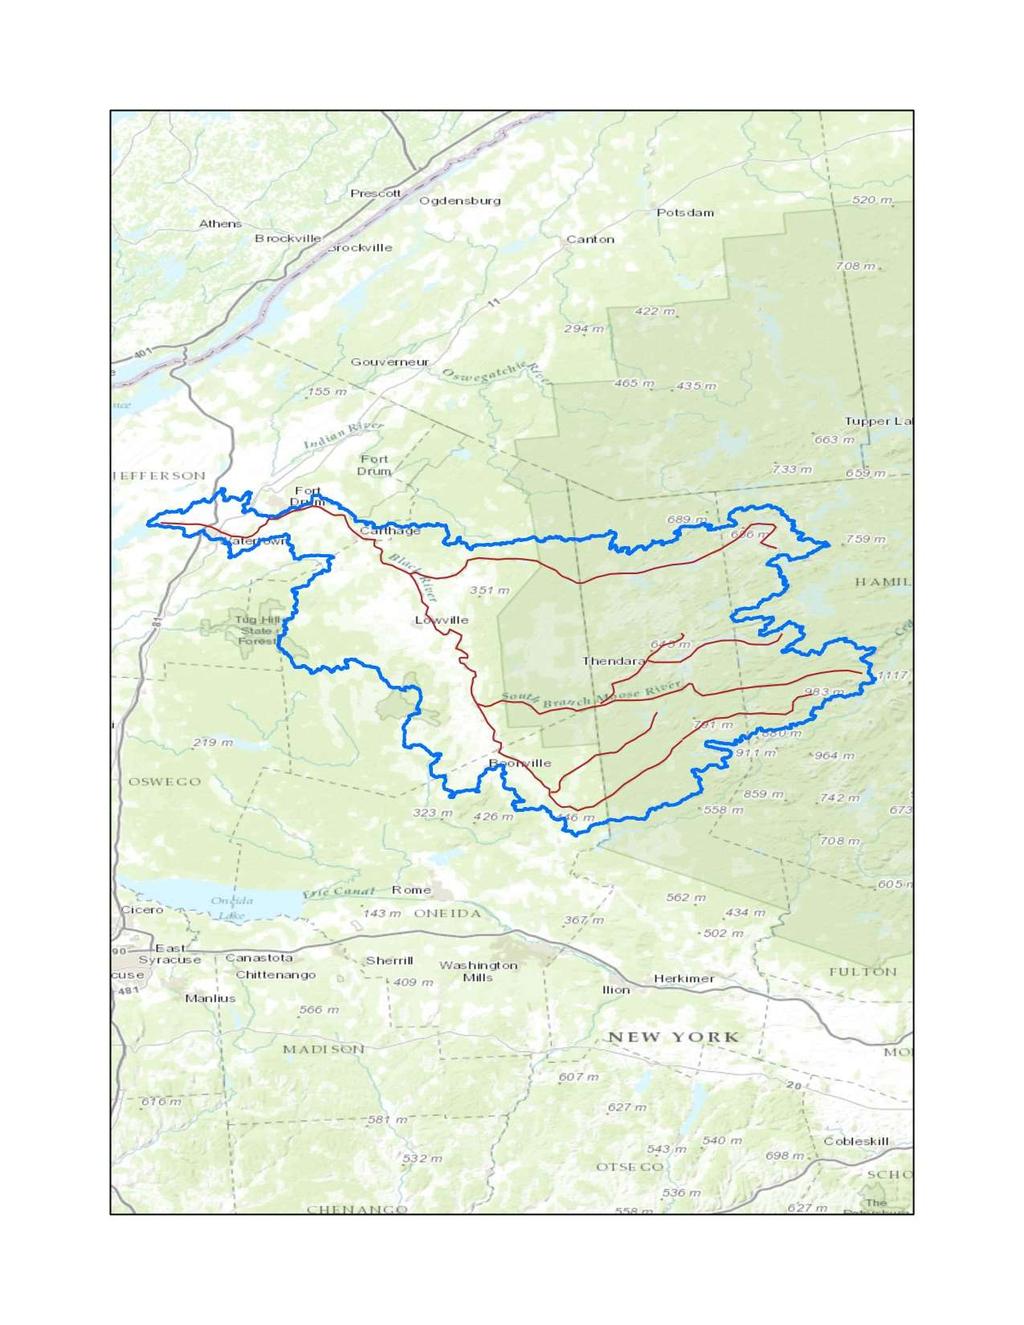 Eastern extent of the Tug Hill Plateau